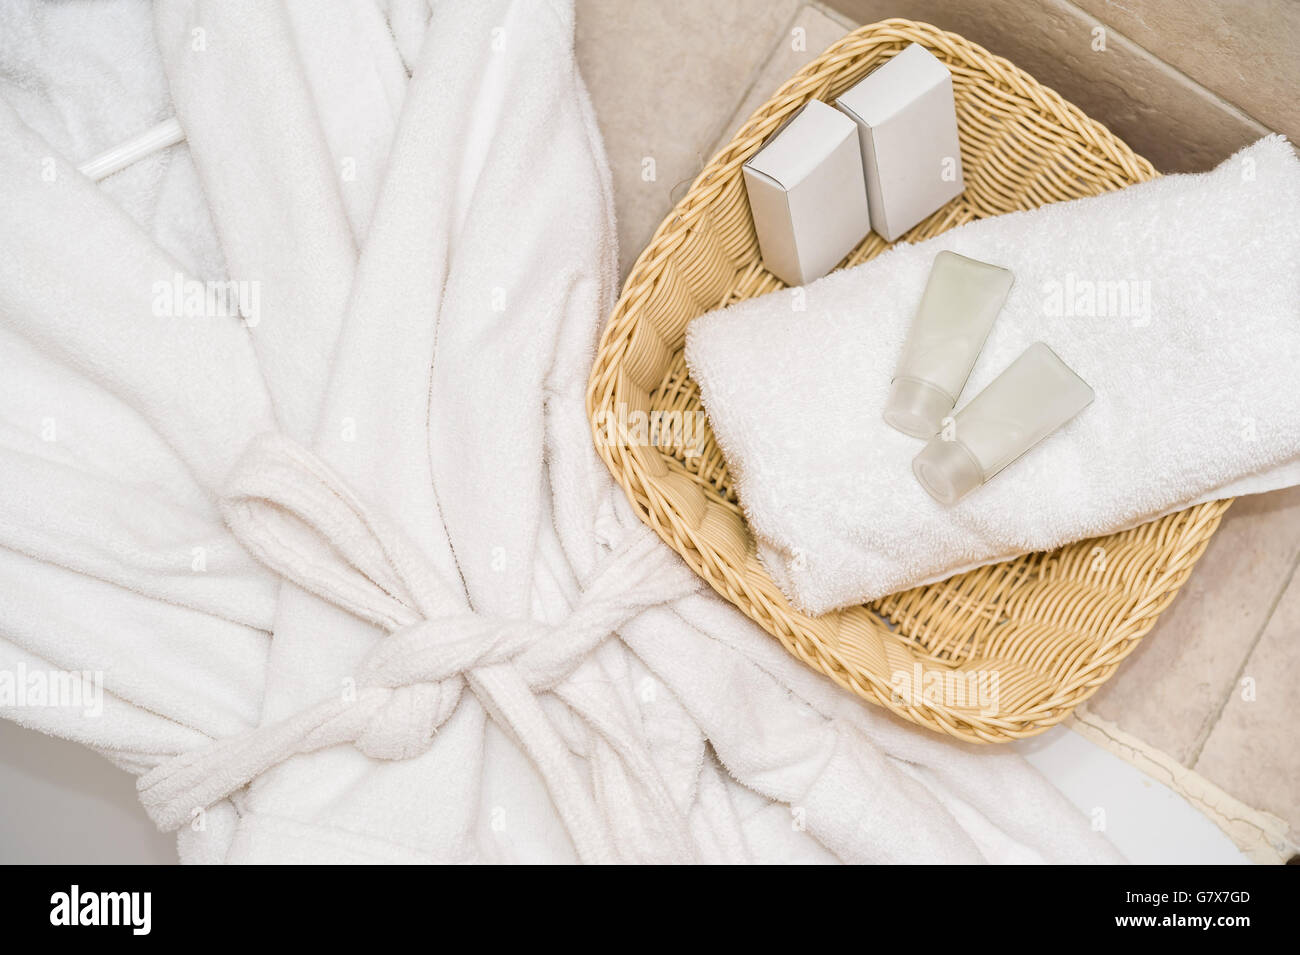 Top view of bathing robe with spa and wellness objects in basket. Stock Photo